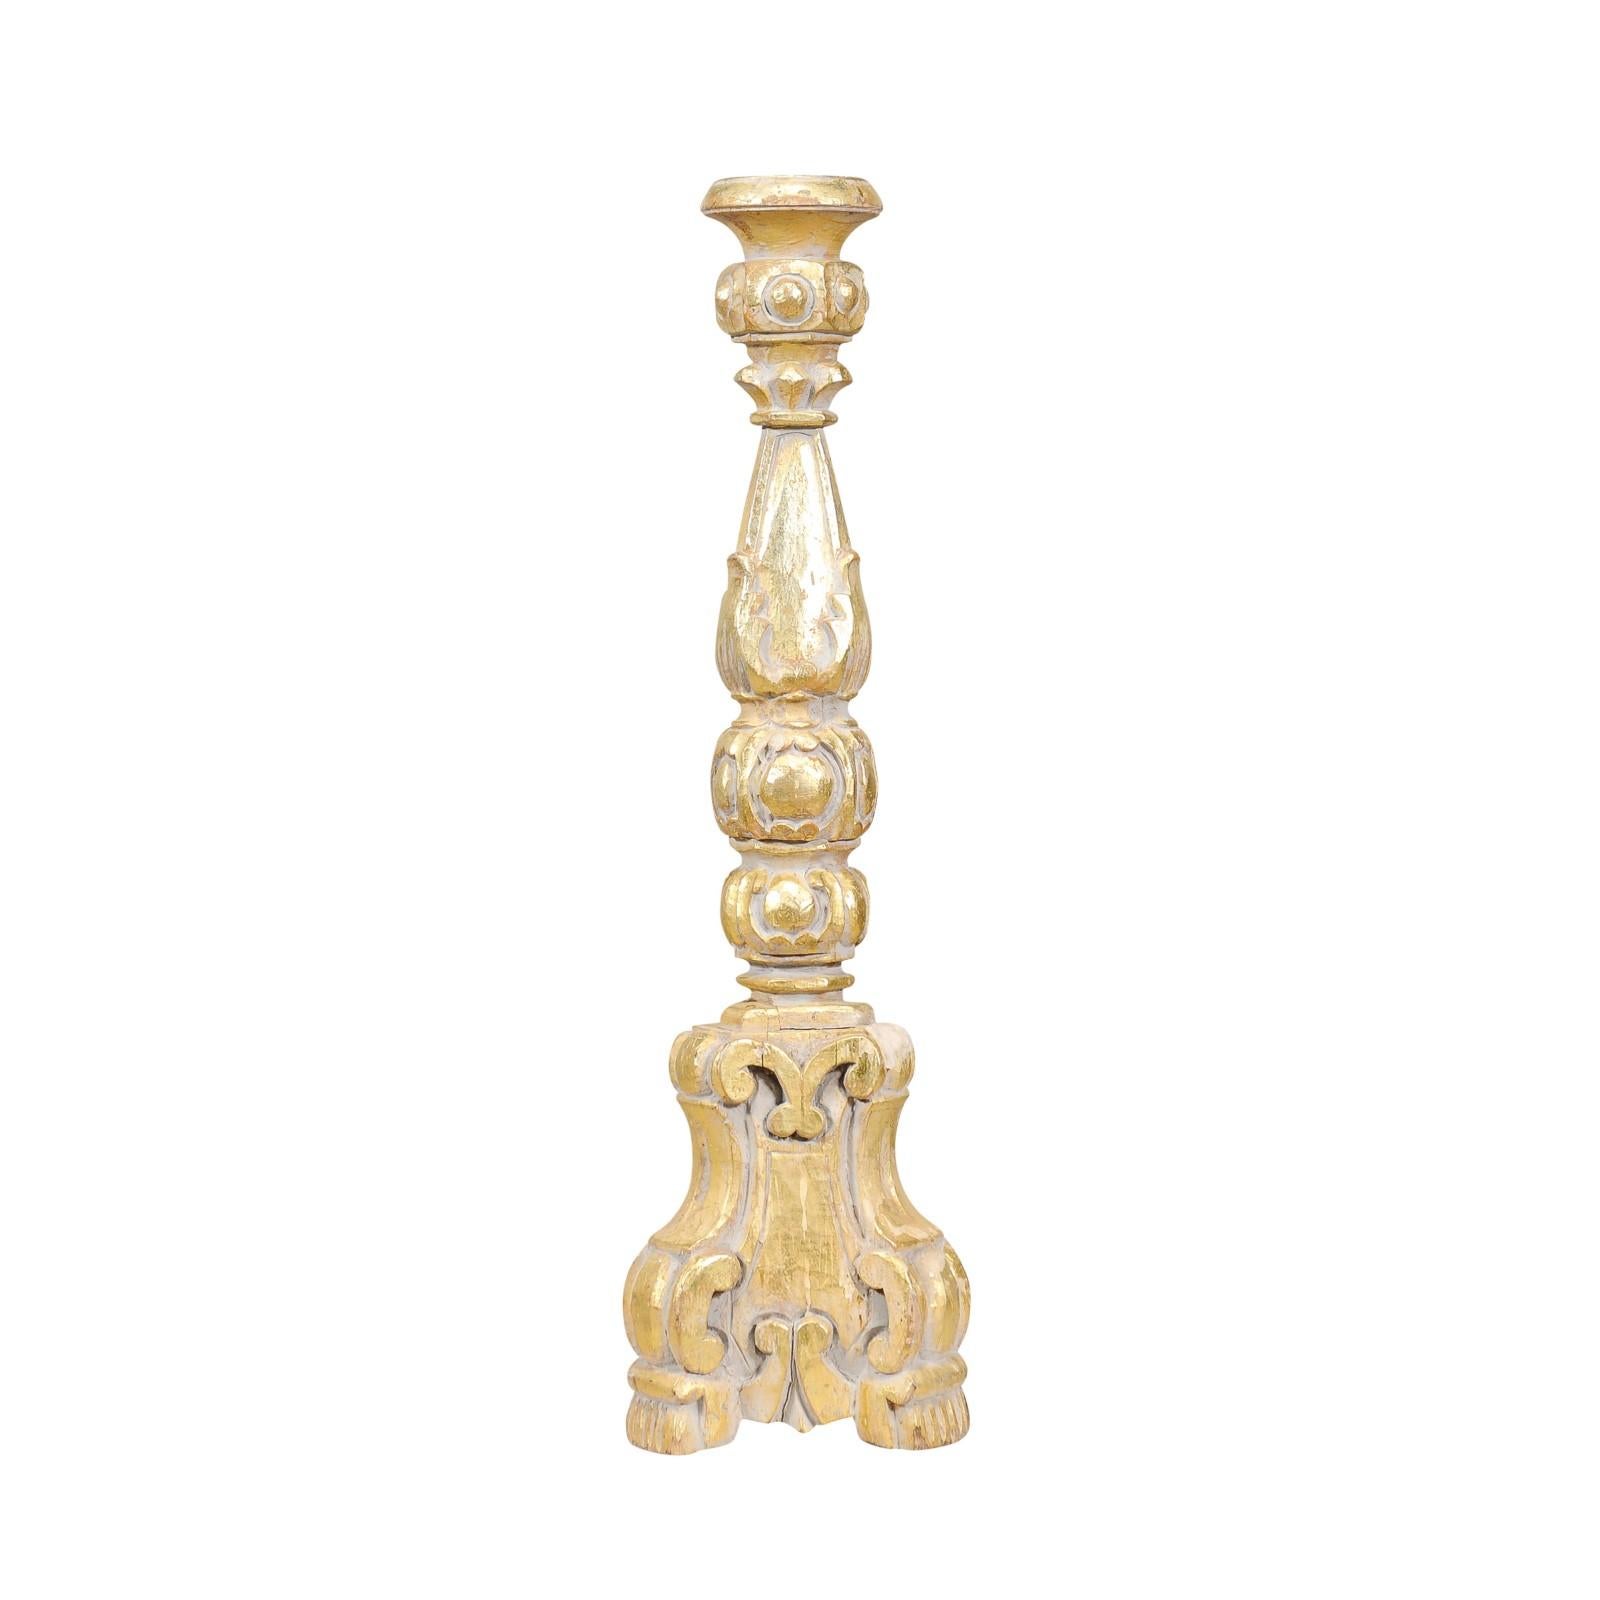 An Italian Rococo style giltwood candlestick from circa 1890 with carved scrolling décor. This Italian Rococo-style giltwood candlestick, dating back to circa 1890, exudes opulence and elegance. Its ornate design is a testament to the craftsmanship